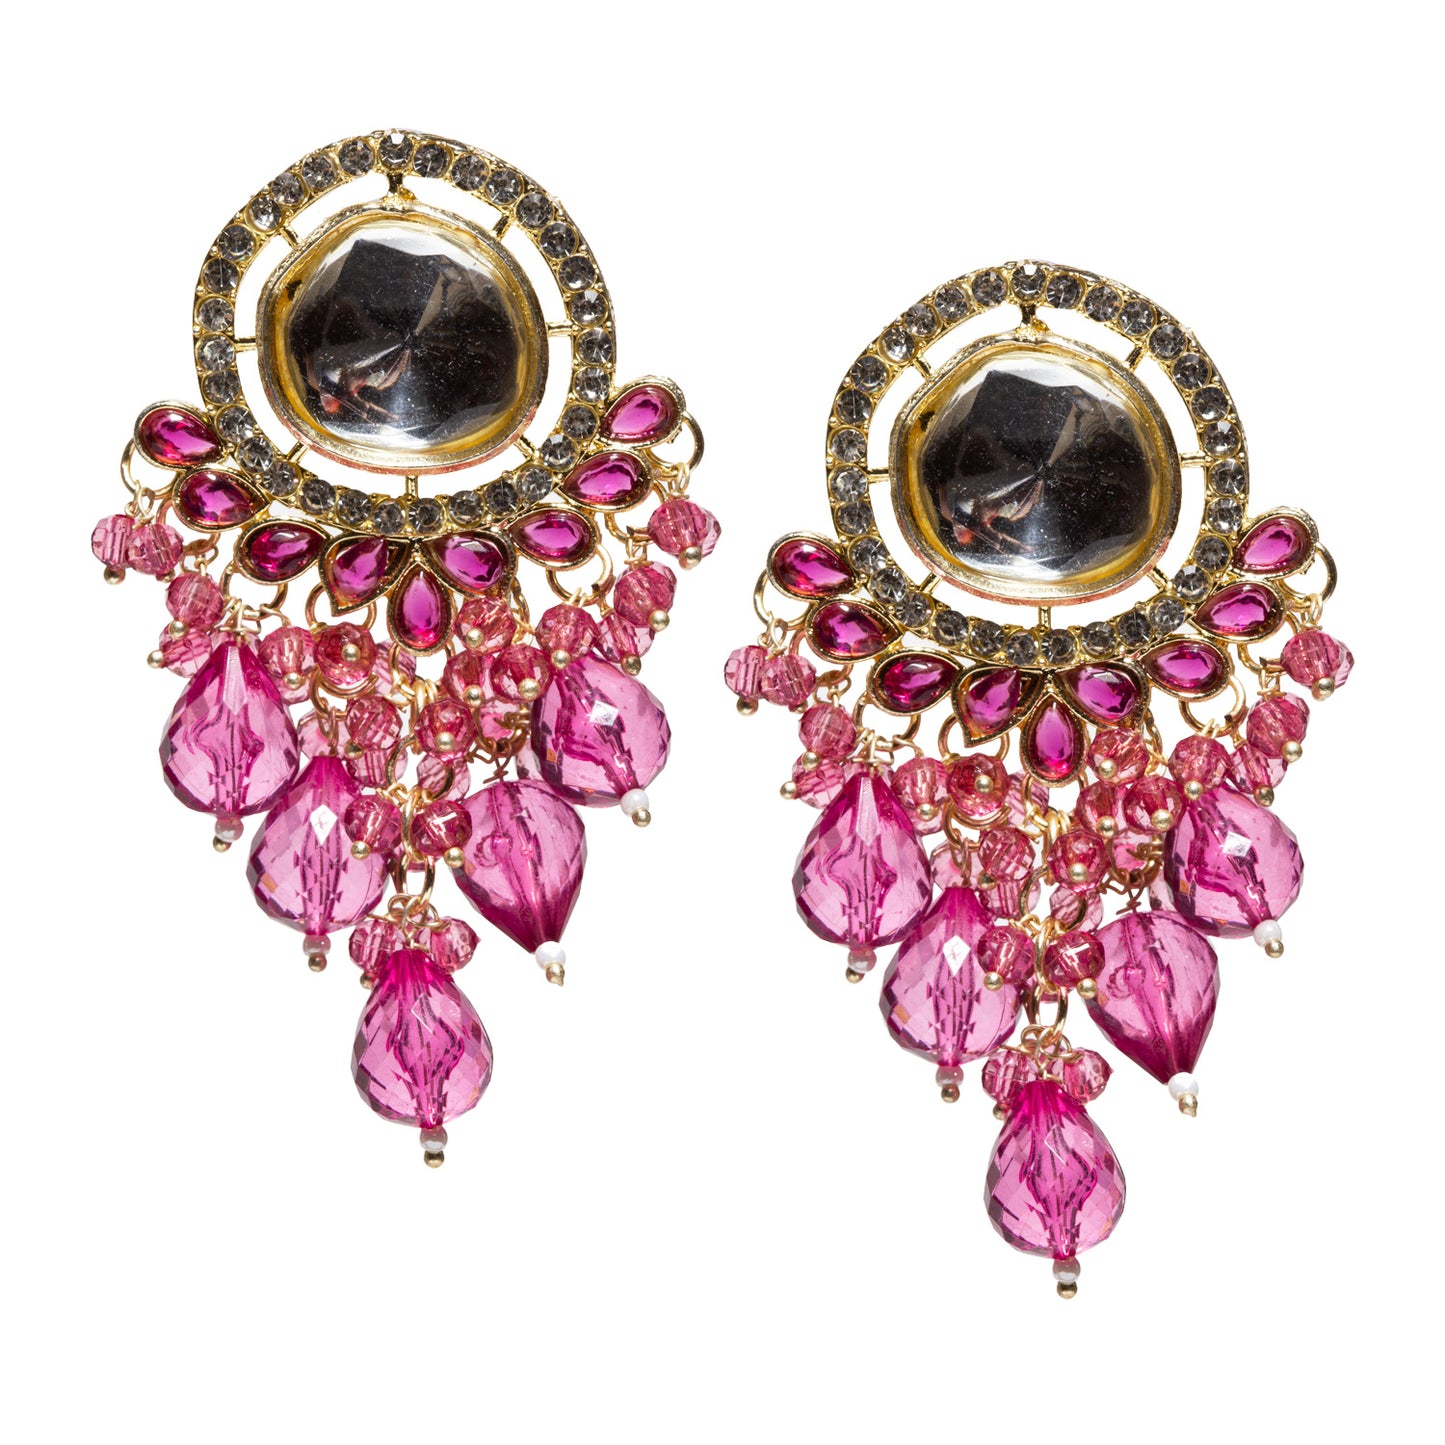 Bindhani-Gold-Plated-CZ-Stone-Purplewine-Drop-Earrings-For-Women-and-Girls